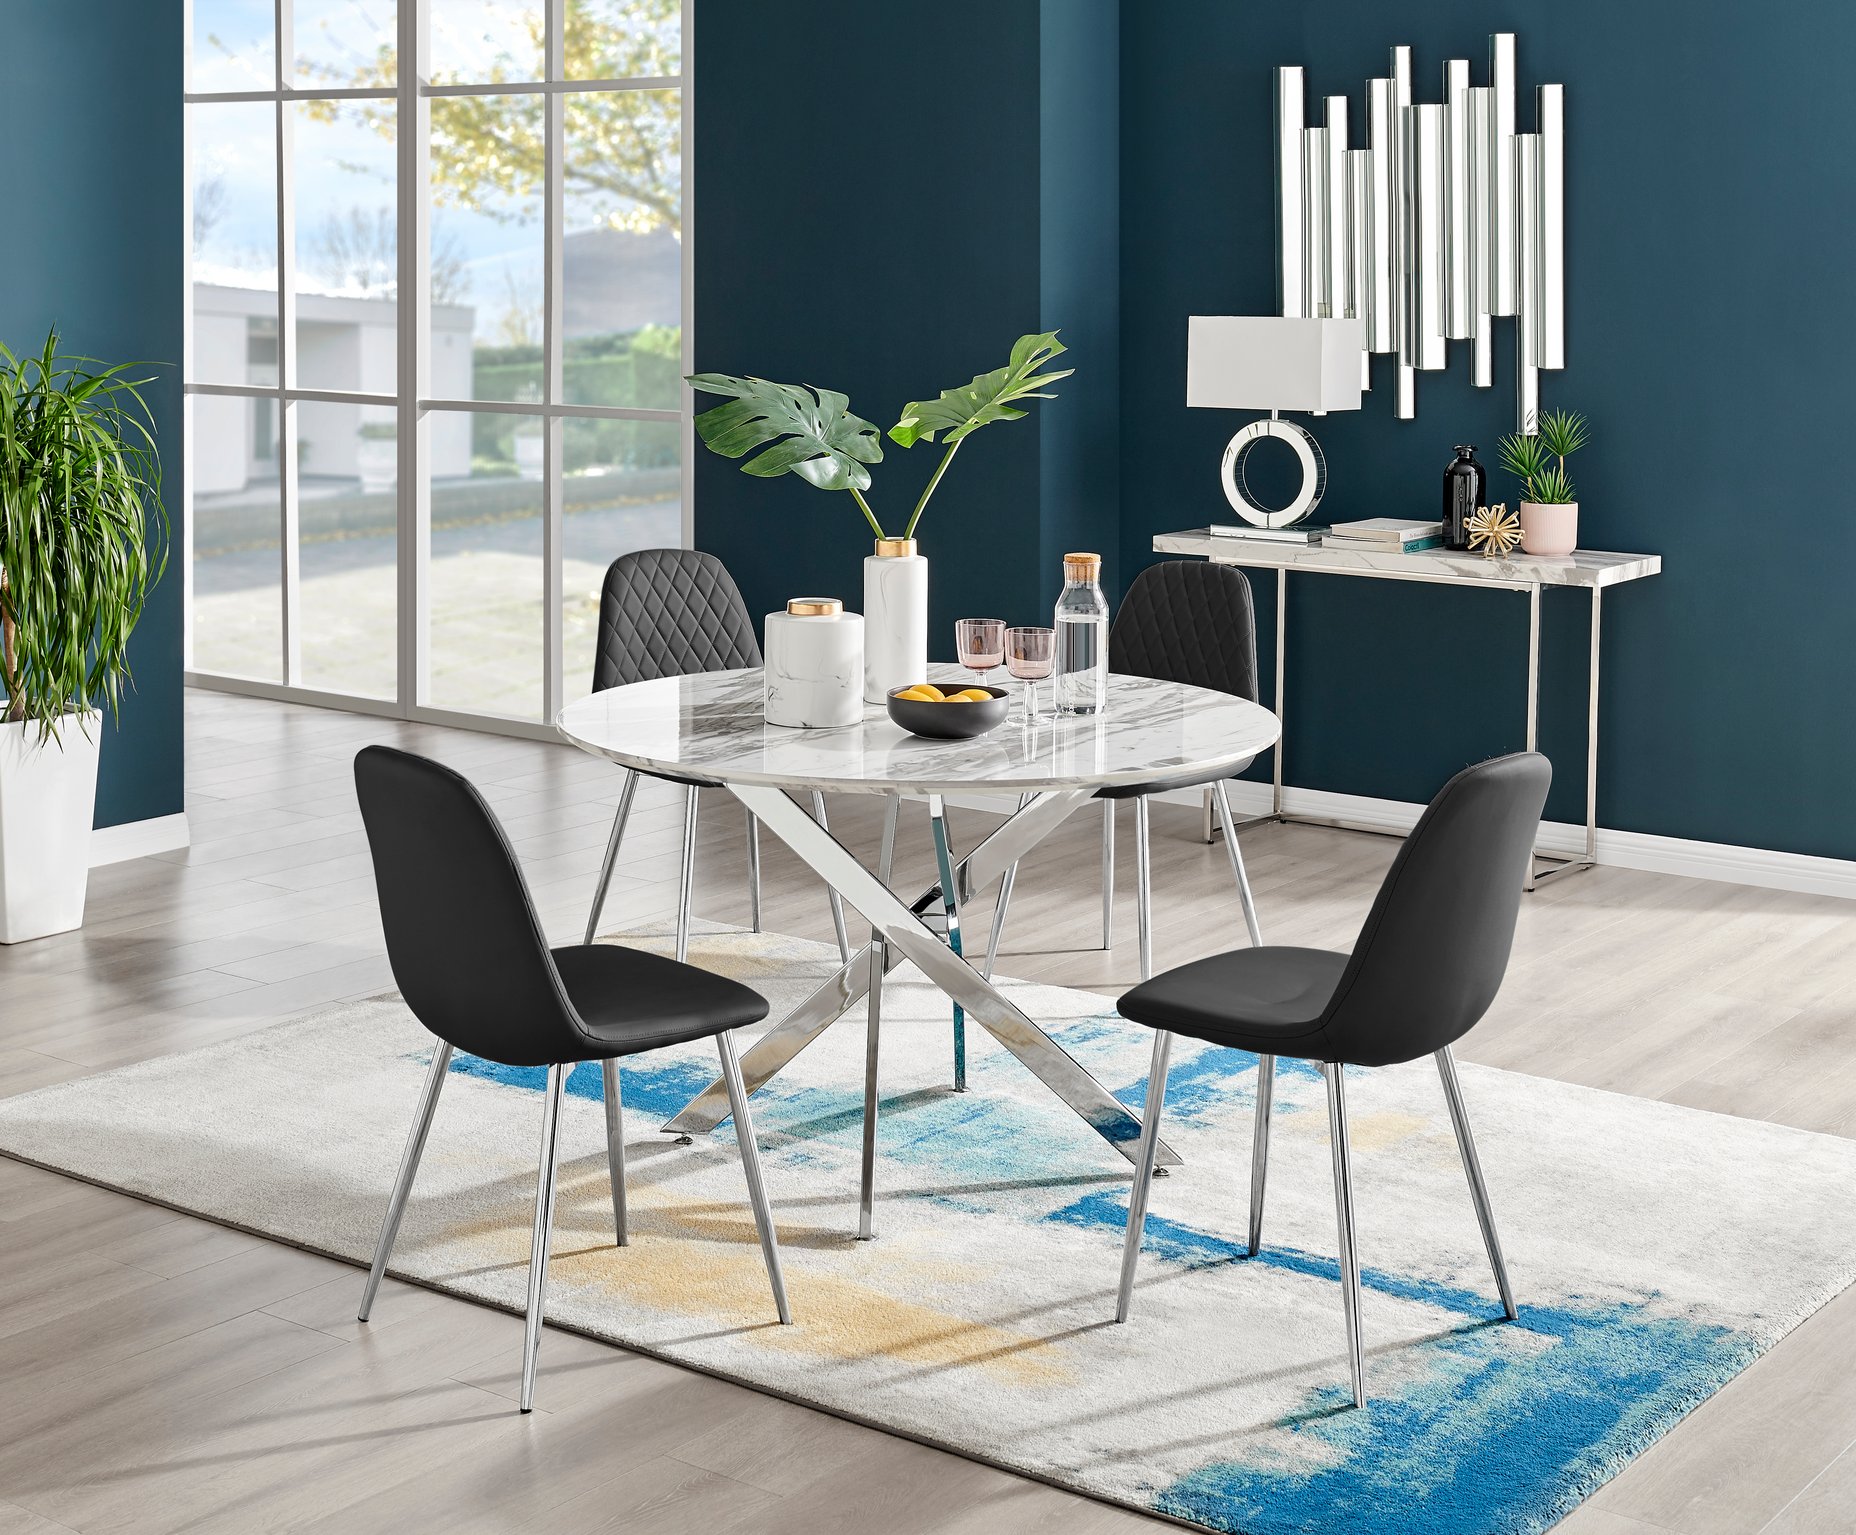 Novara White Marble Round Dining Table 120cm and 4 Corona Chairs Furniture Set